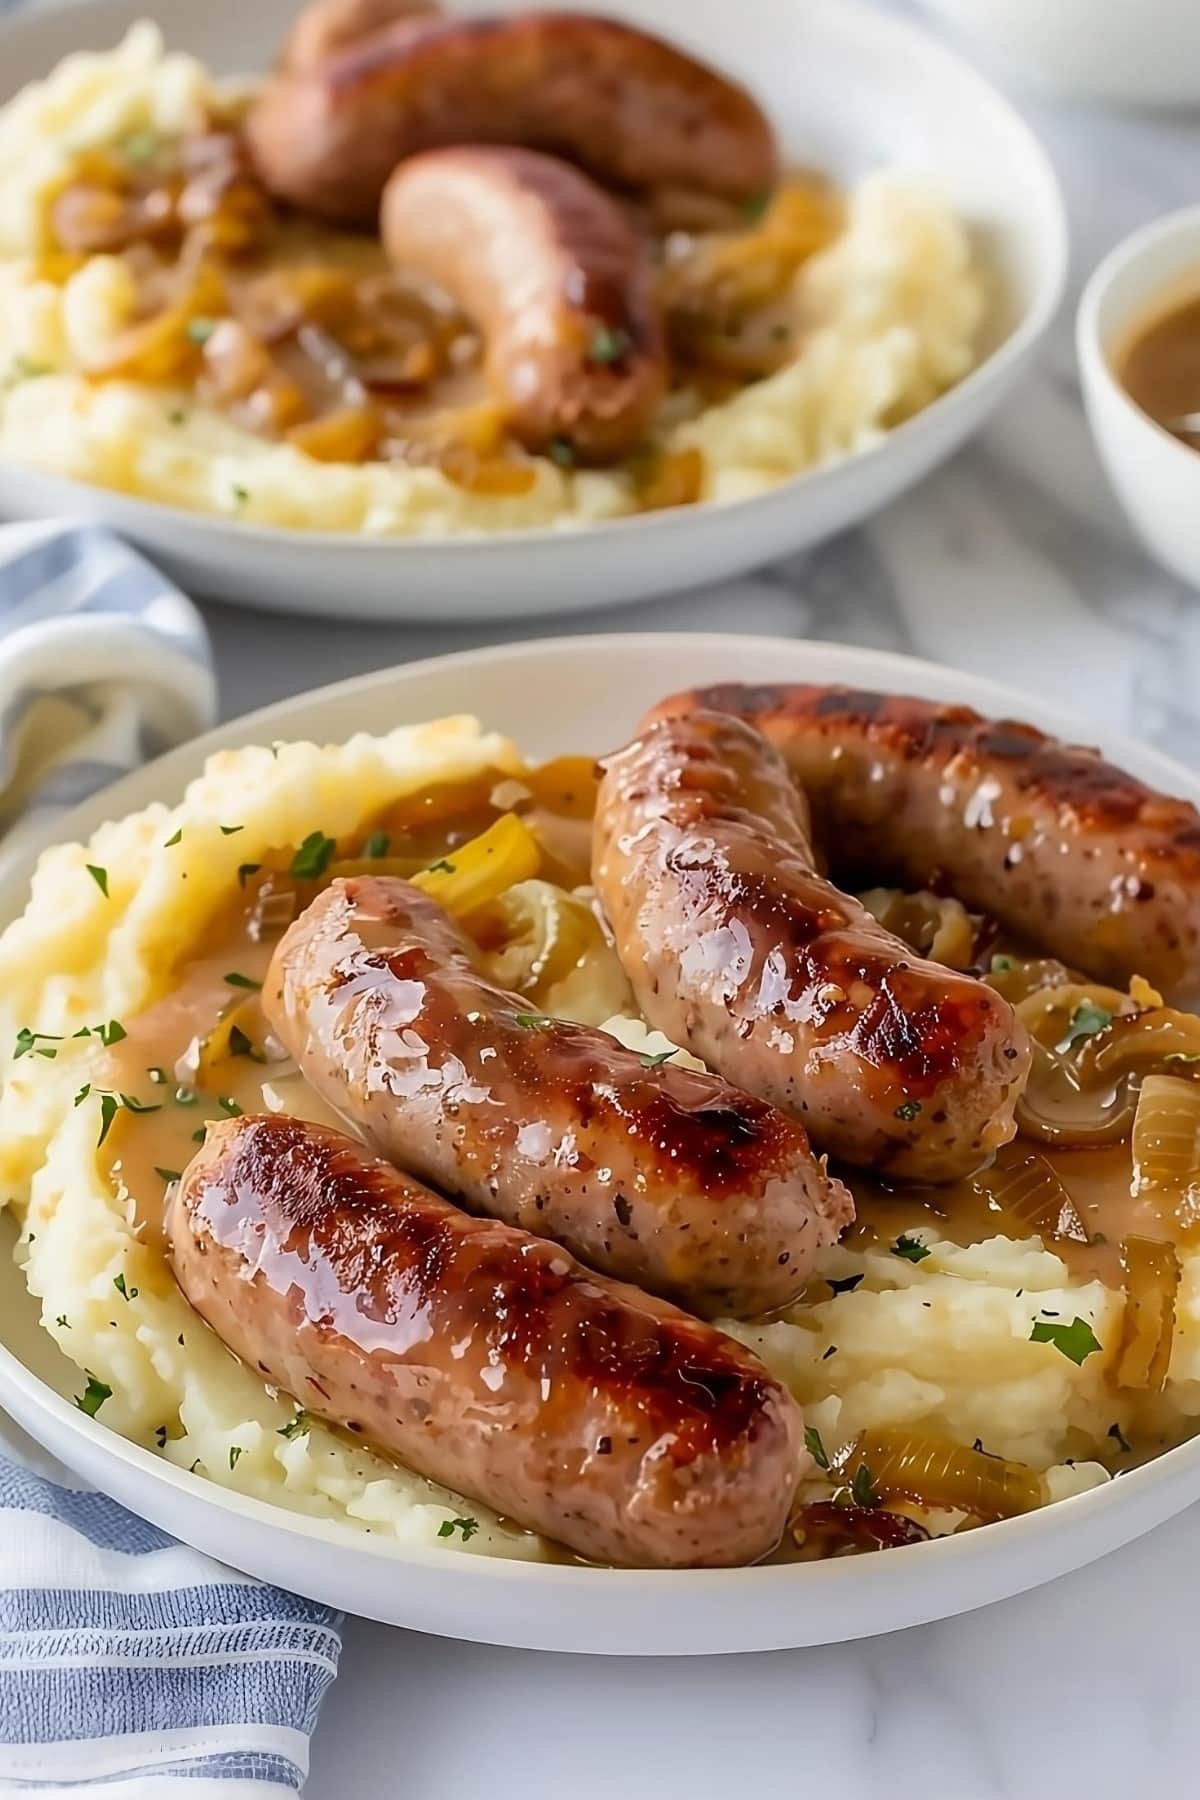 Mashed potatoes topped with sausage and onion gravy.